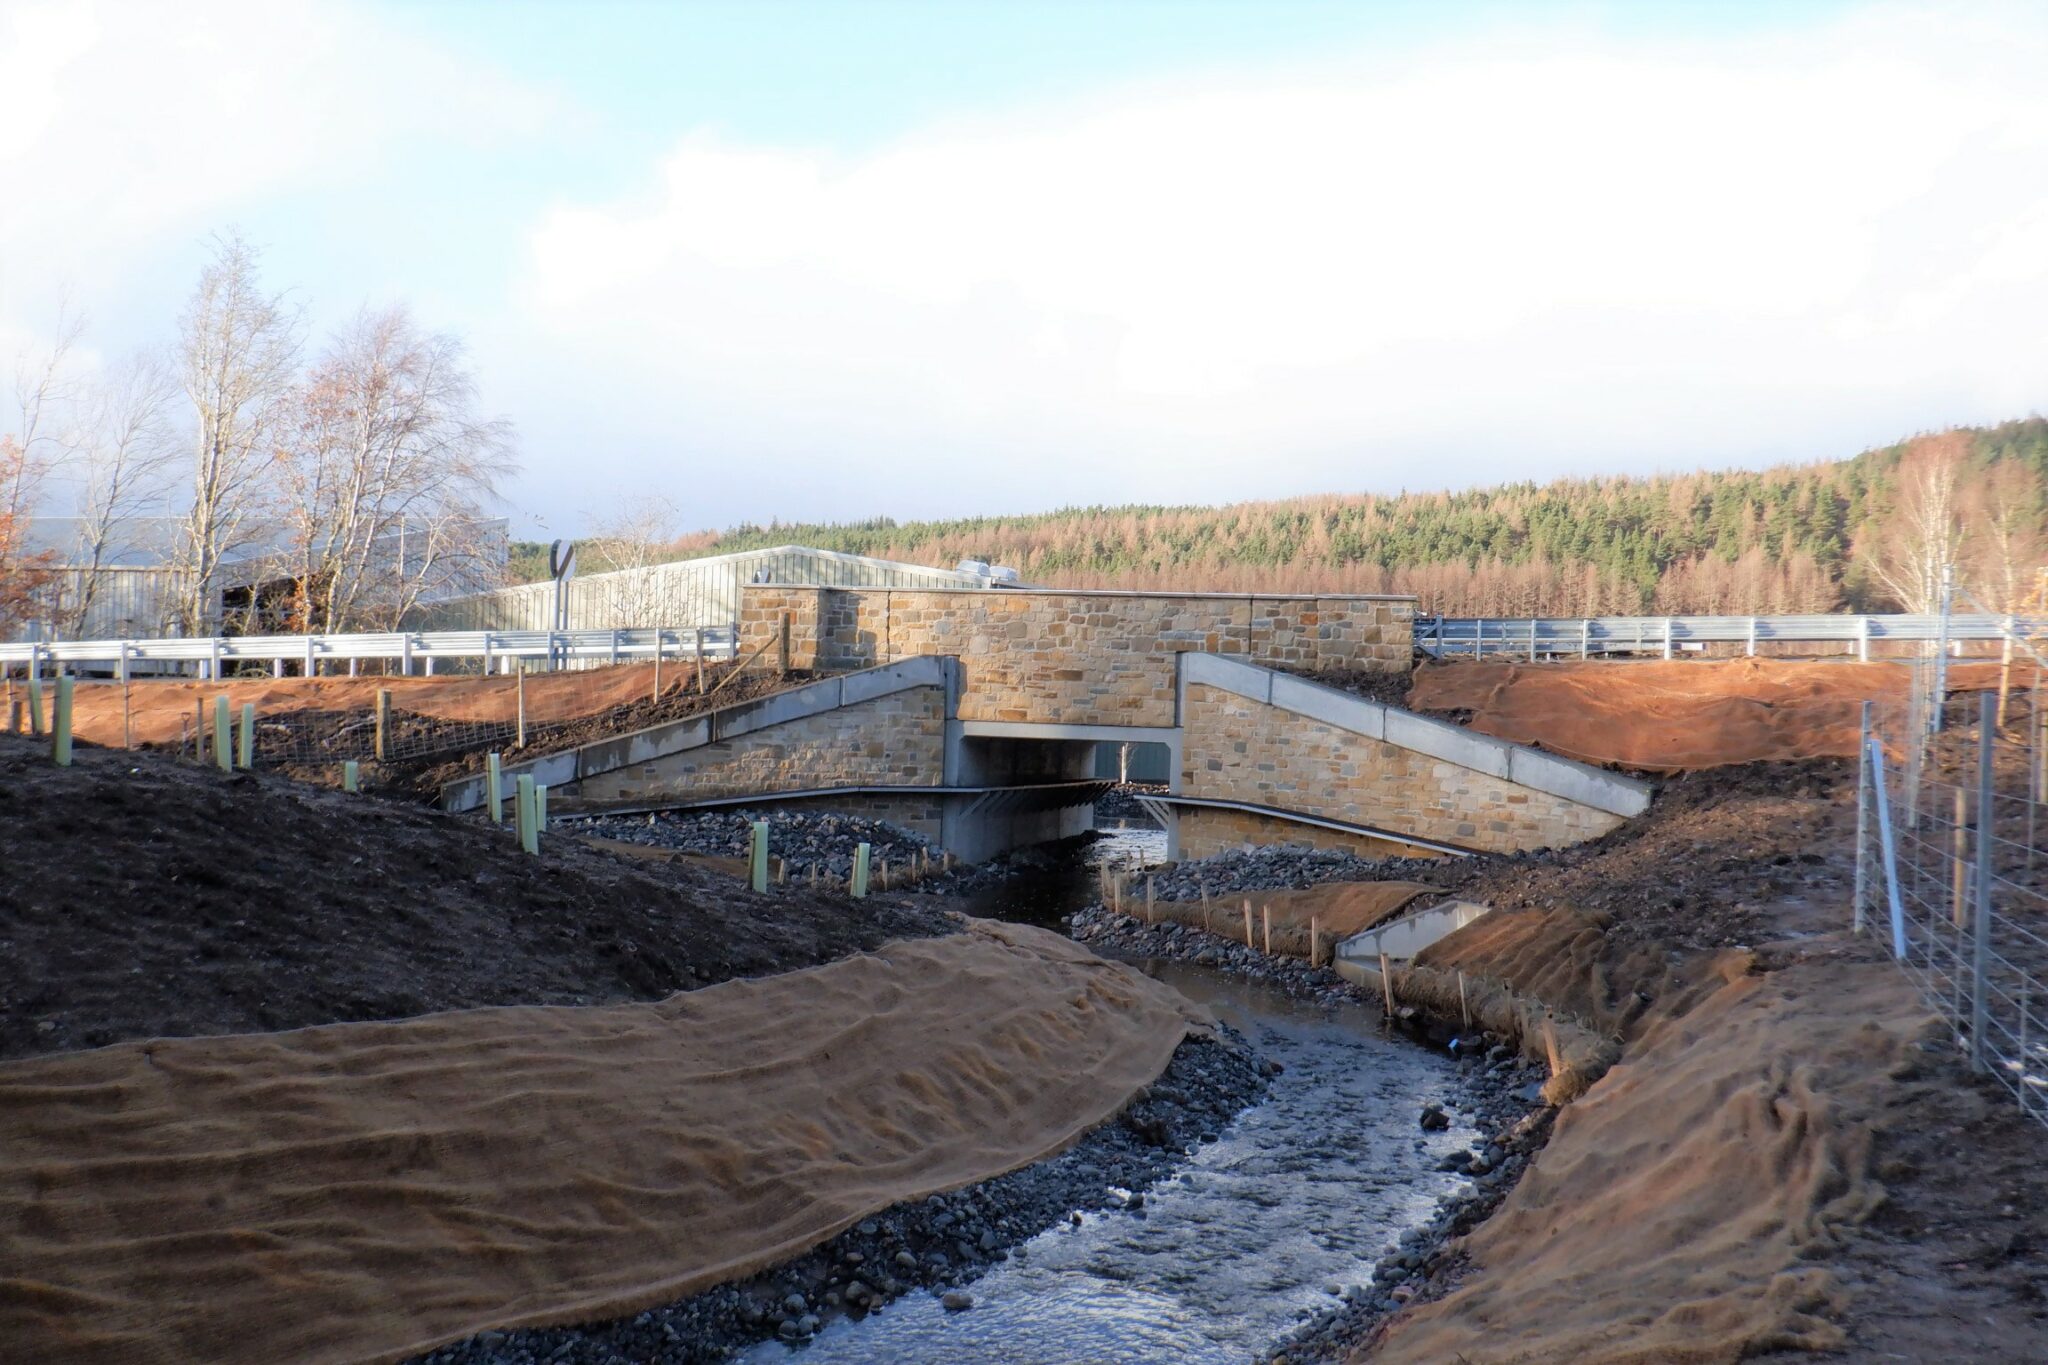 NEW £1.5M BRIDGE ON A887 OPENS TO ROAD USERS IN GLENMORISTON